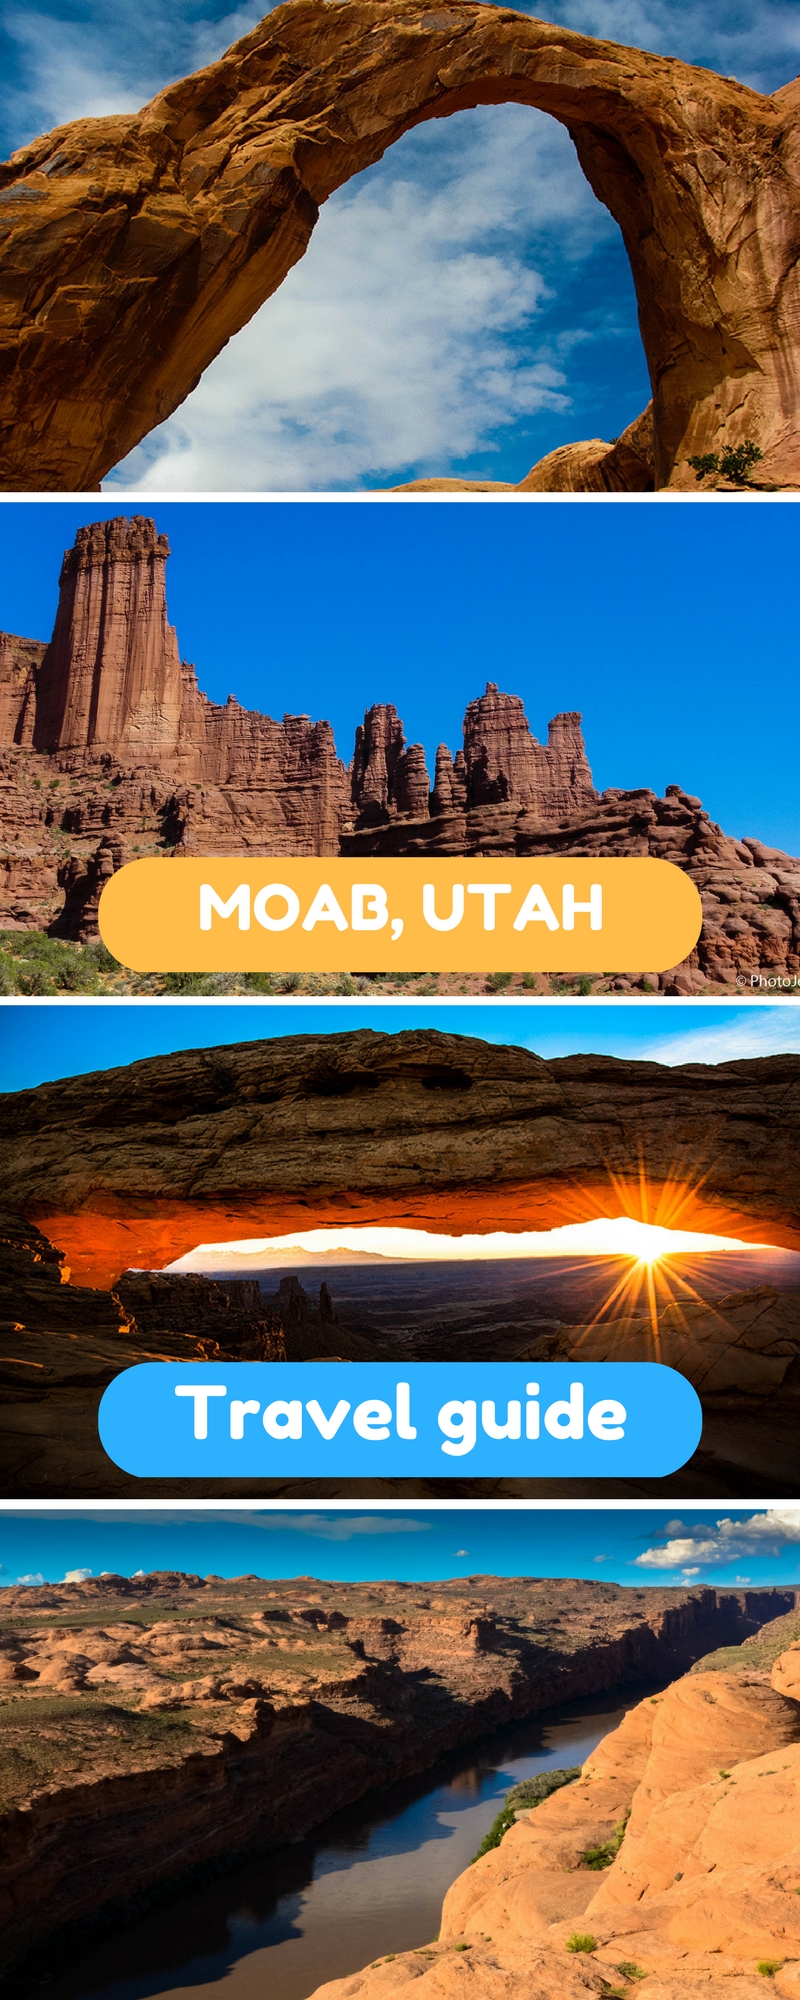 The complete travel guide to Moab, Utah 